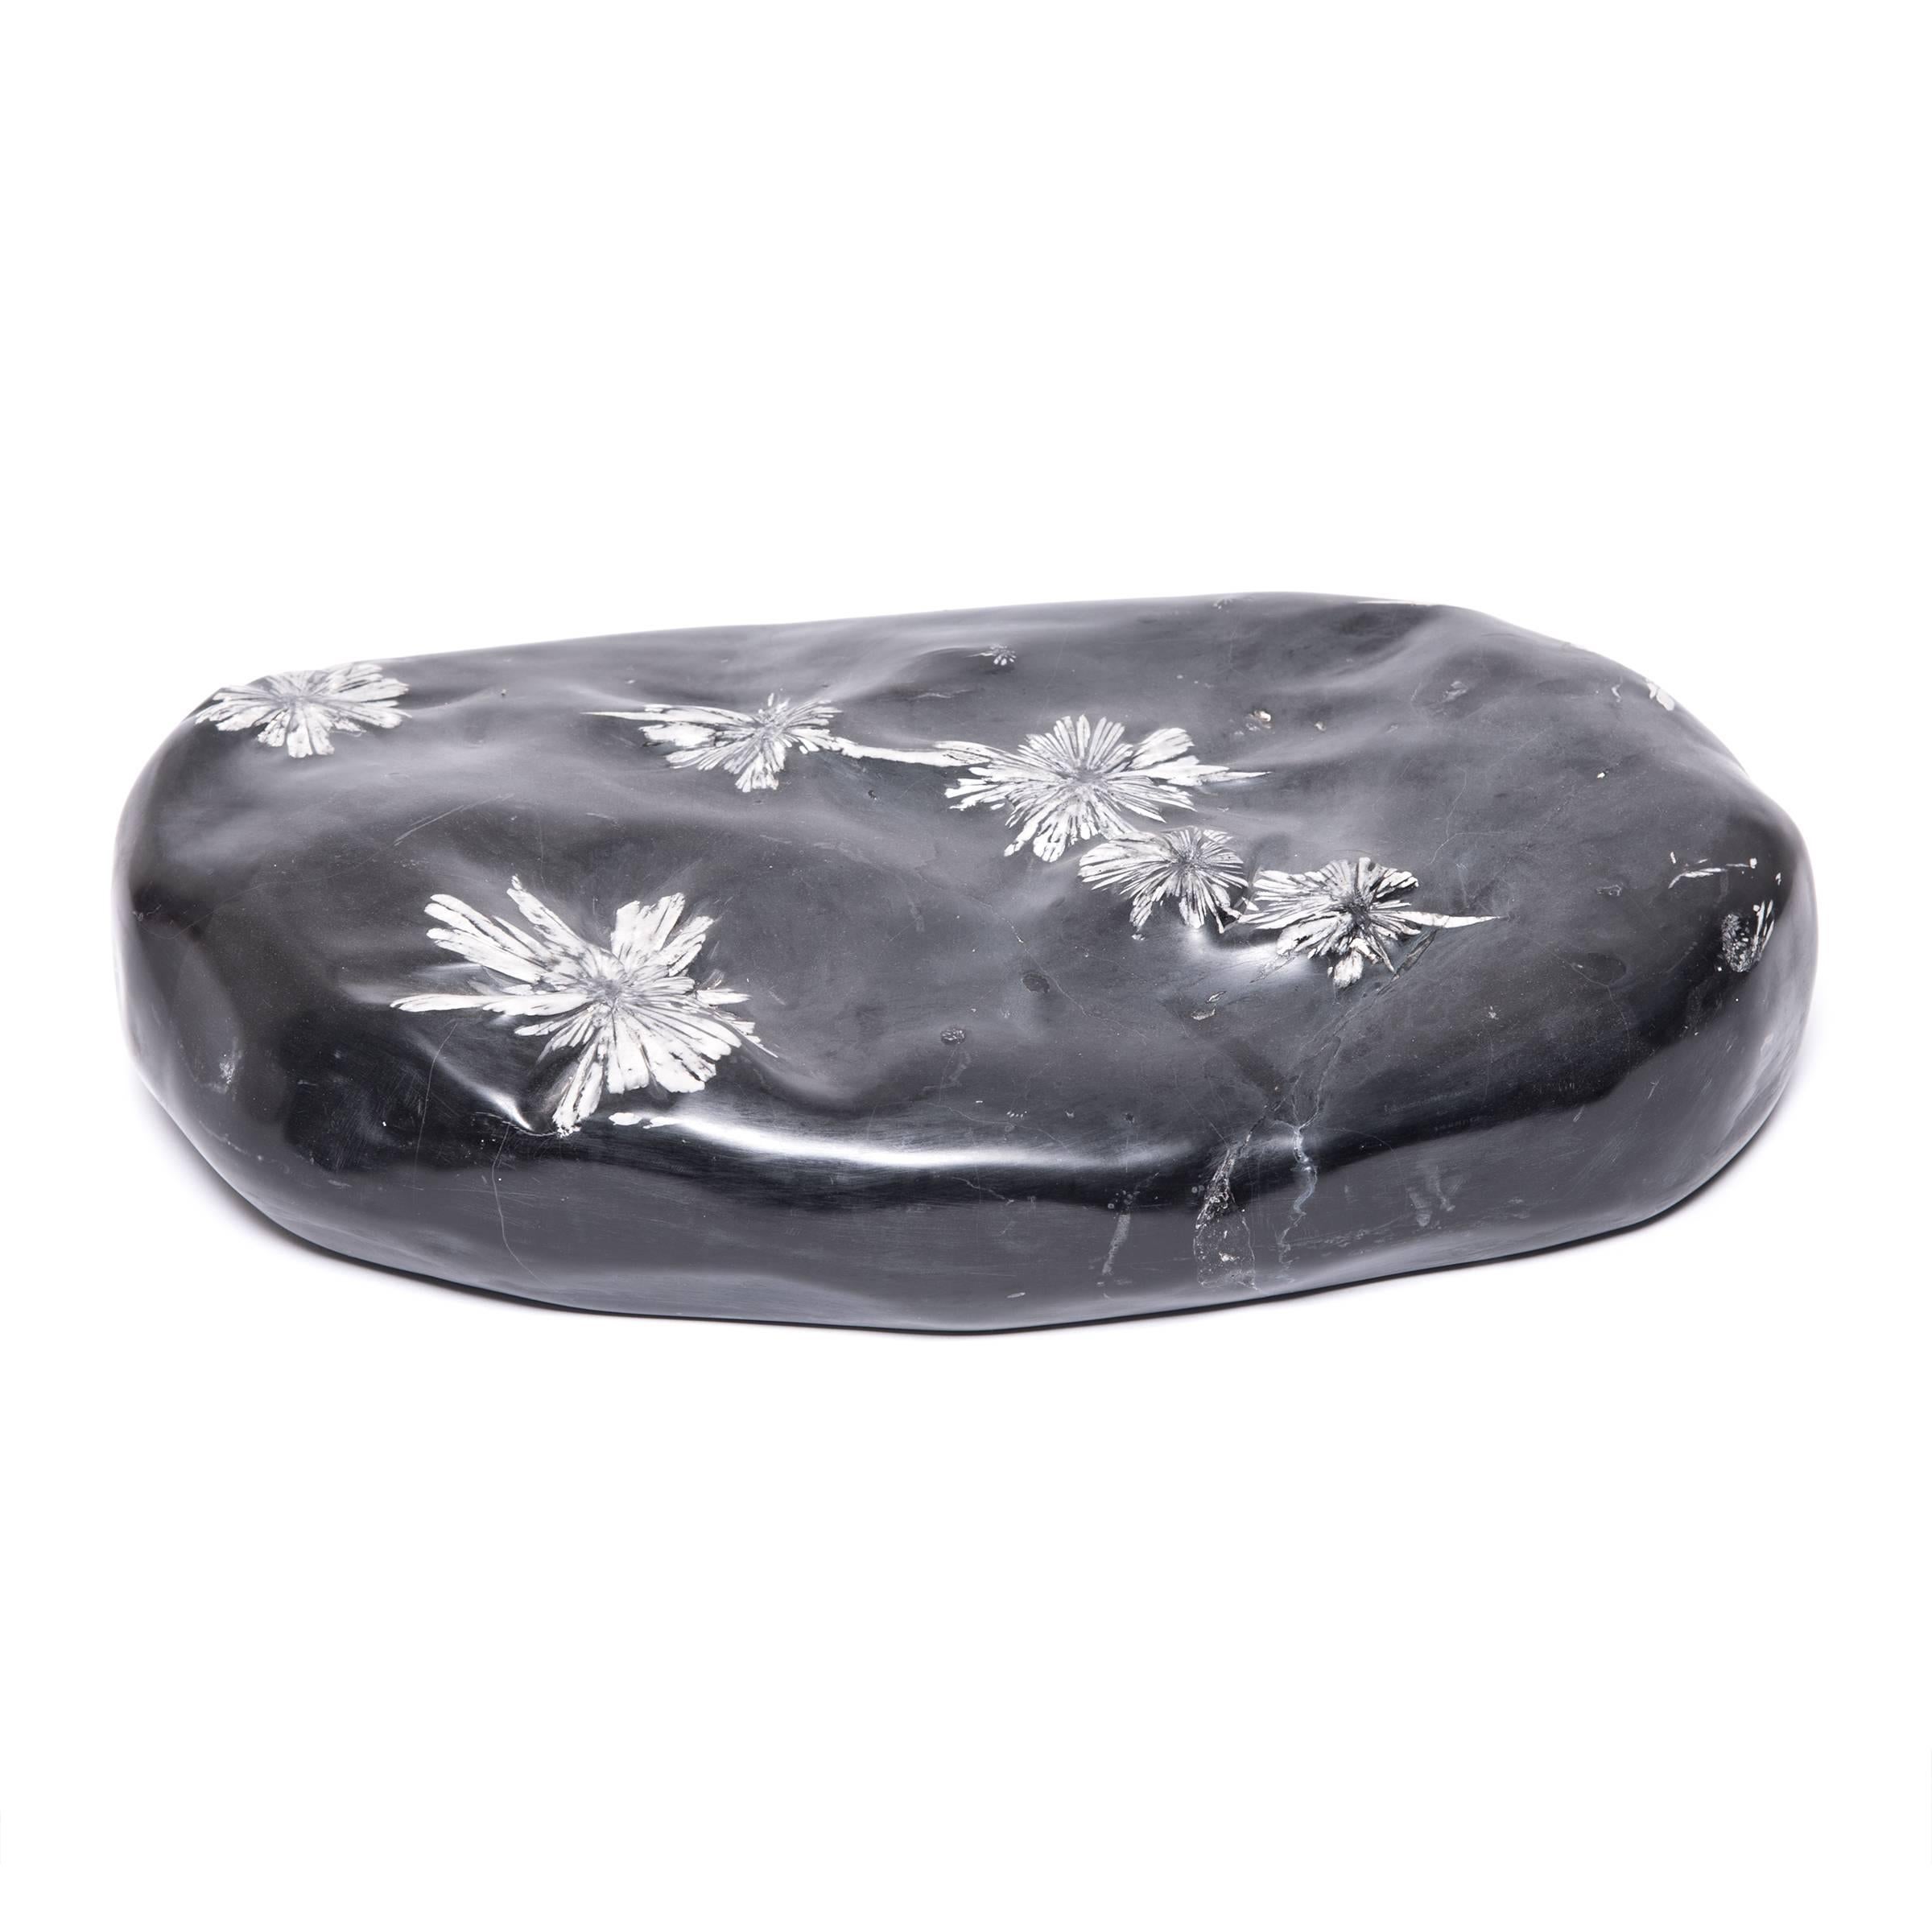 Chrysanthemum stones, formed hundreds of millions of years ago, are appreciated for their naturally occurring celestine crystals, which resemble chrysanthemum blossoms. Our artisans in Shandong thoughtfully polished this specimen to add dimension to